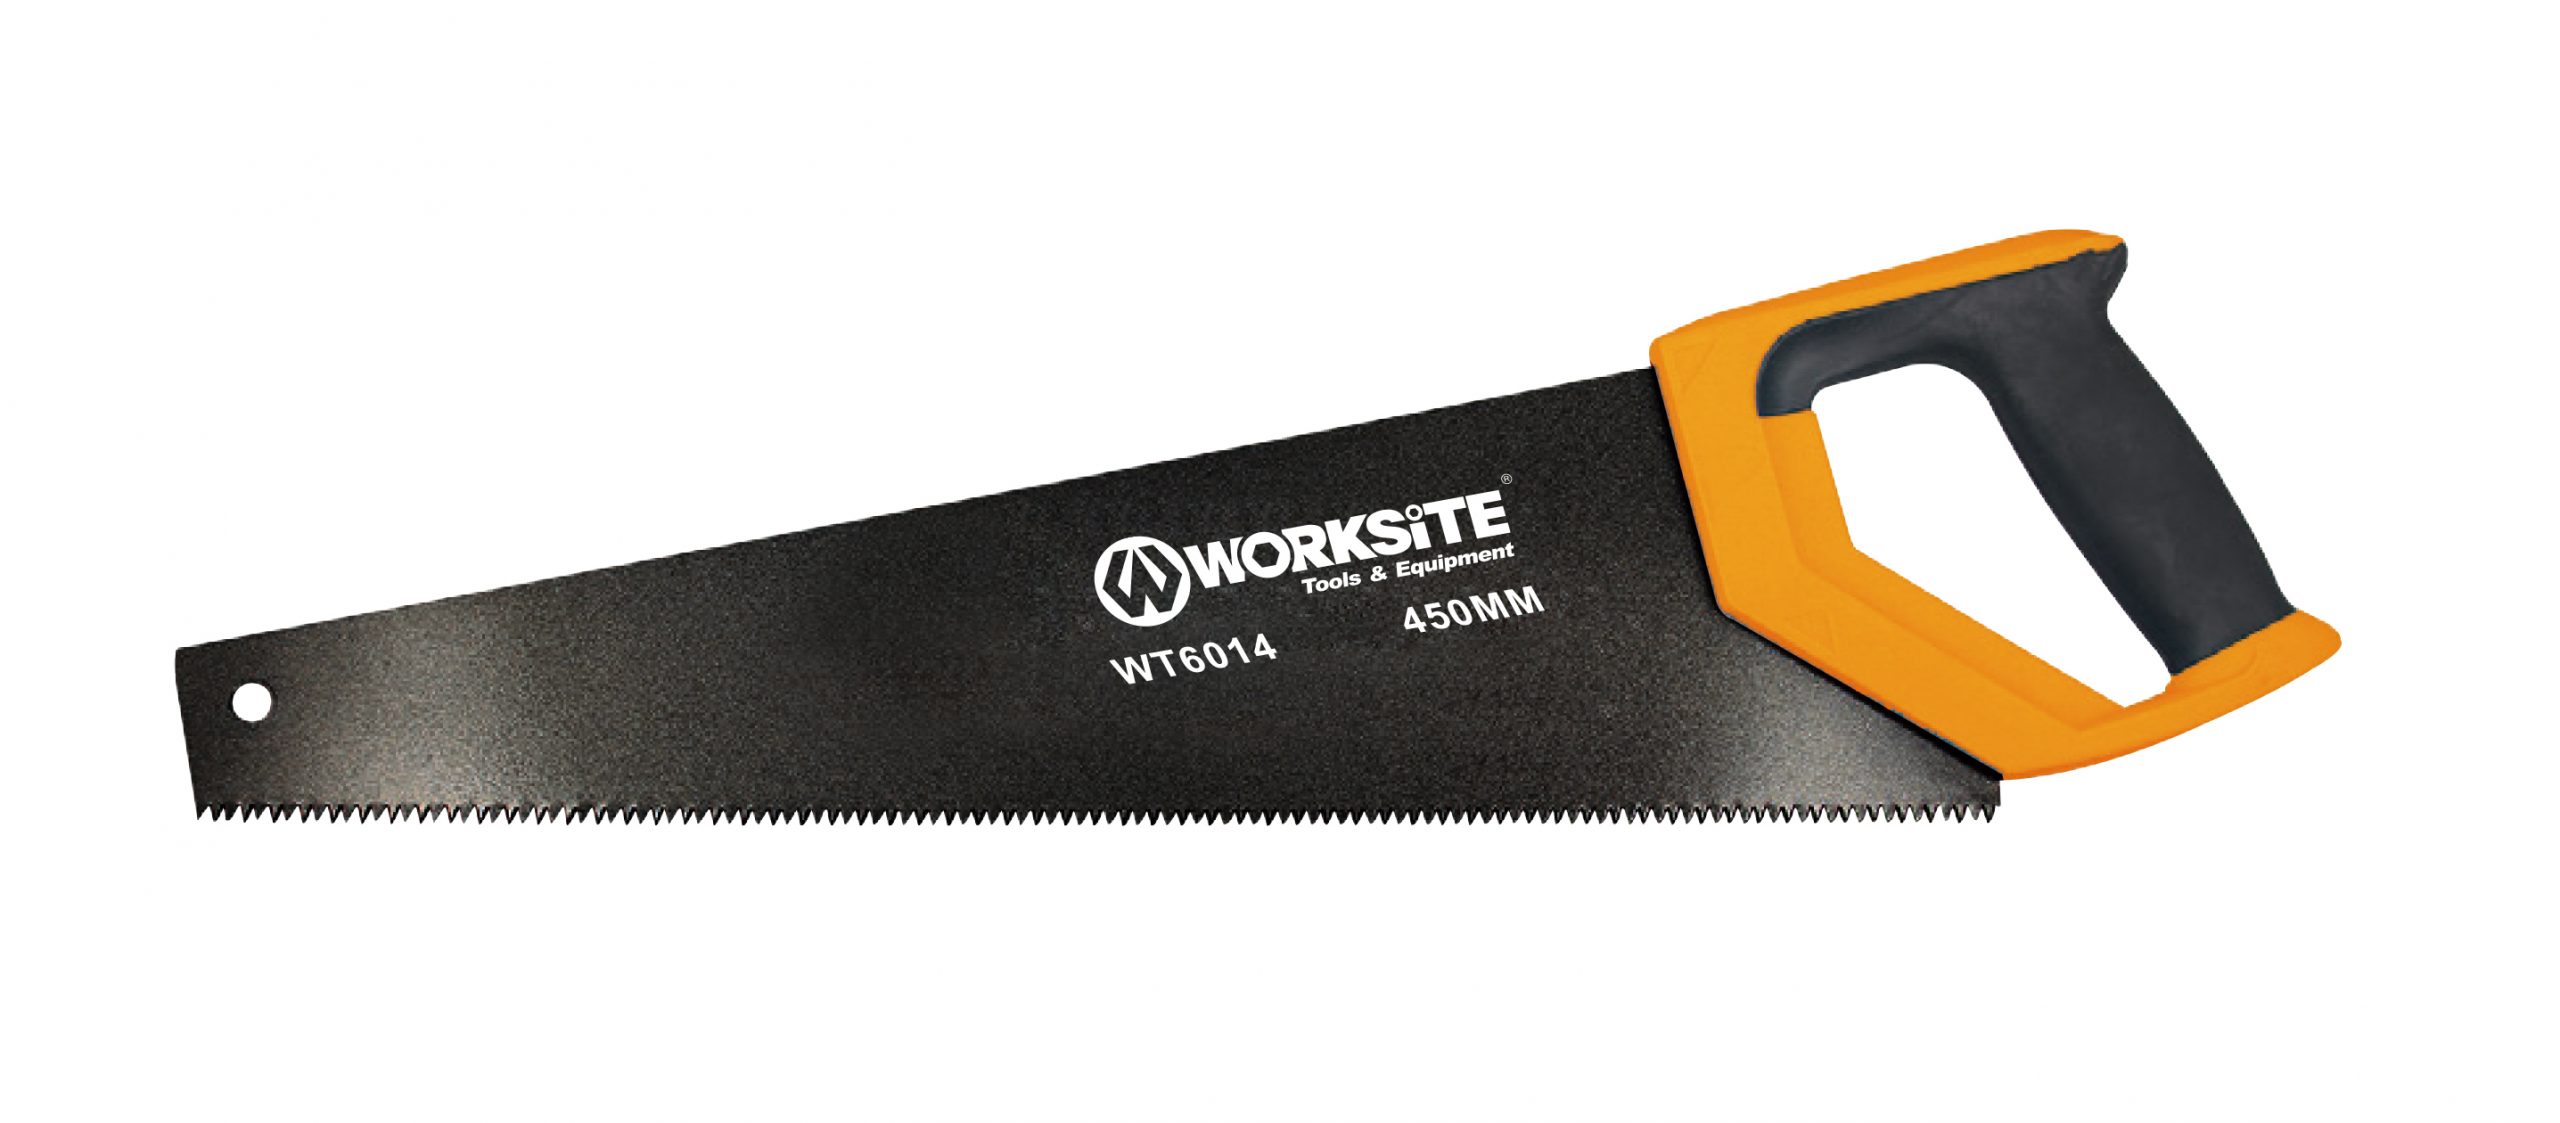 Worksite Hand Saw 18inches/20inches. 3 sided precision ground and induction hardened teeth for easy and perfect cutting. Perfect Saw for general and specific purposes for both professional and amateur DIY maintenance or work. WT6014